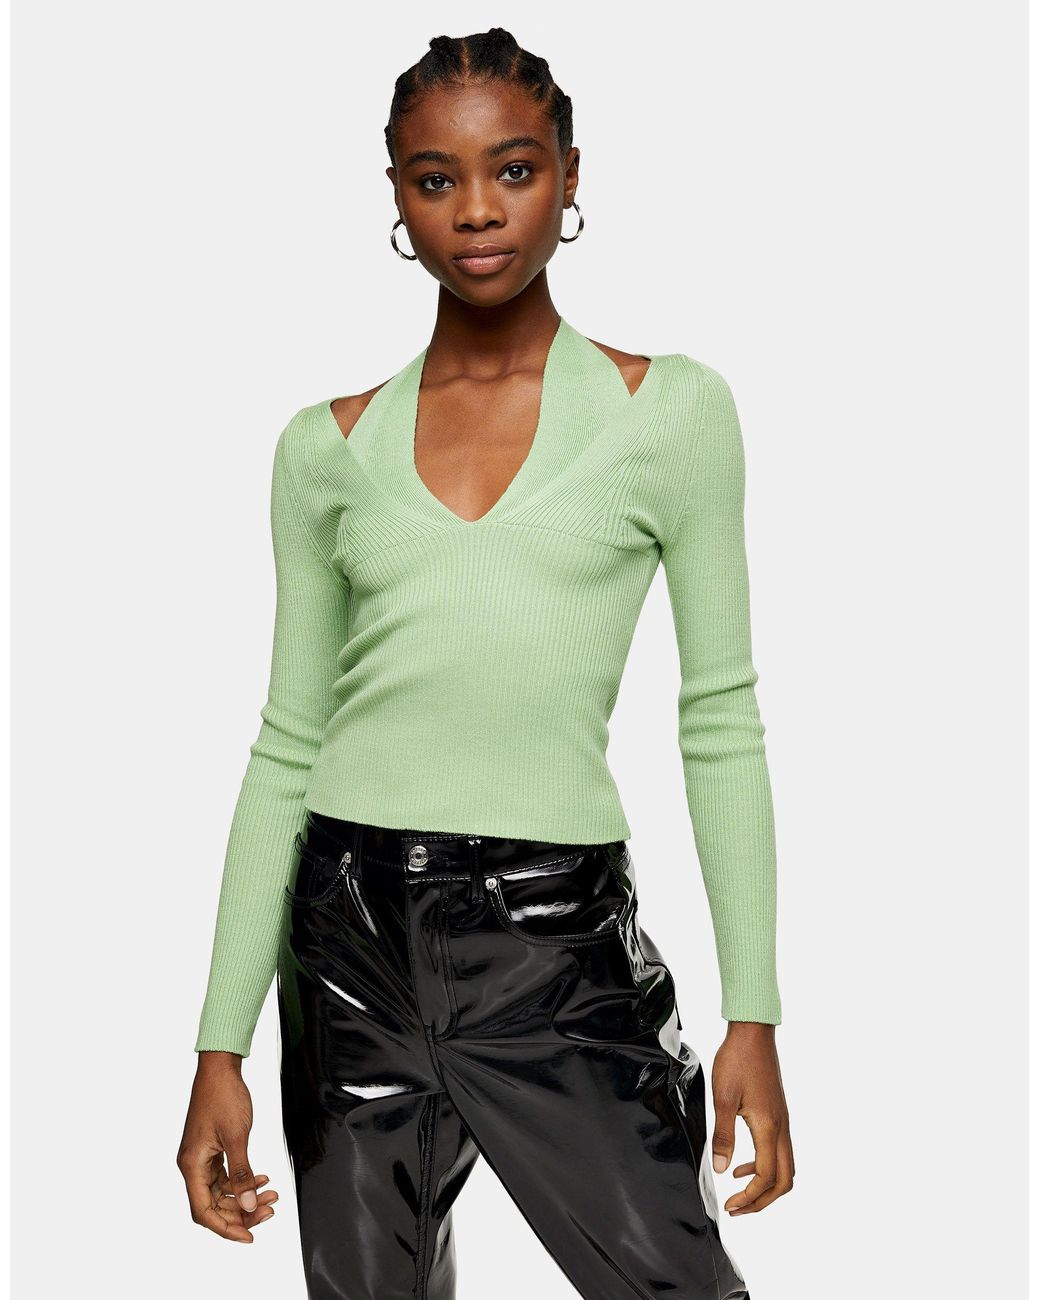 TOPSHOP Strappy Halterneck Cut Out Knitted Top in Green | Lyst Australia